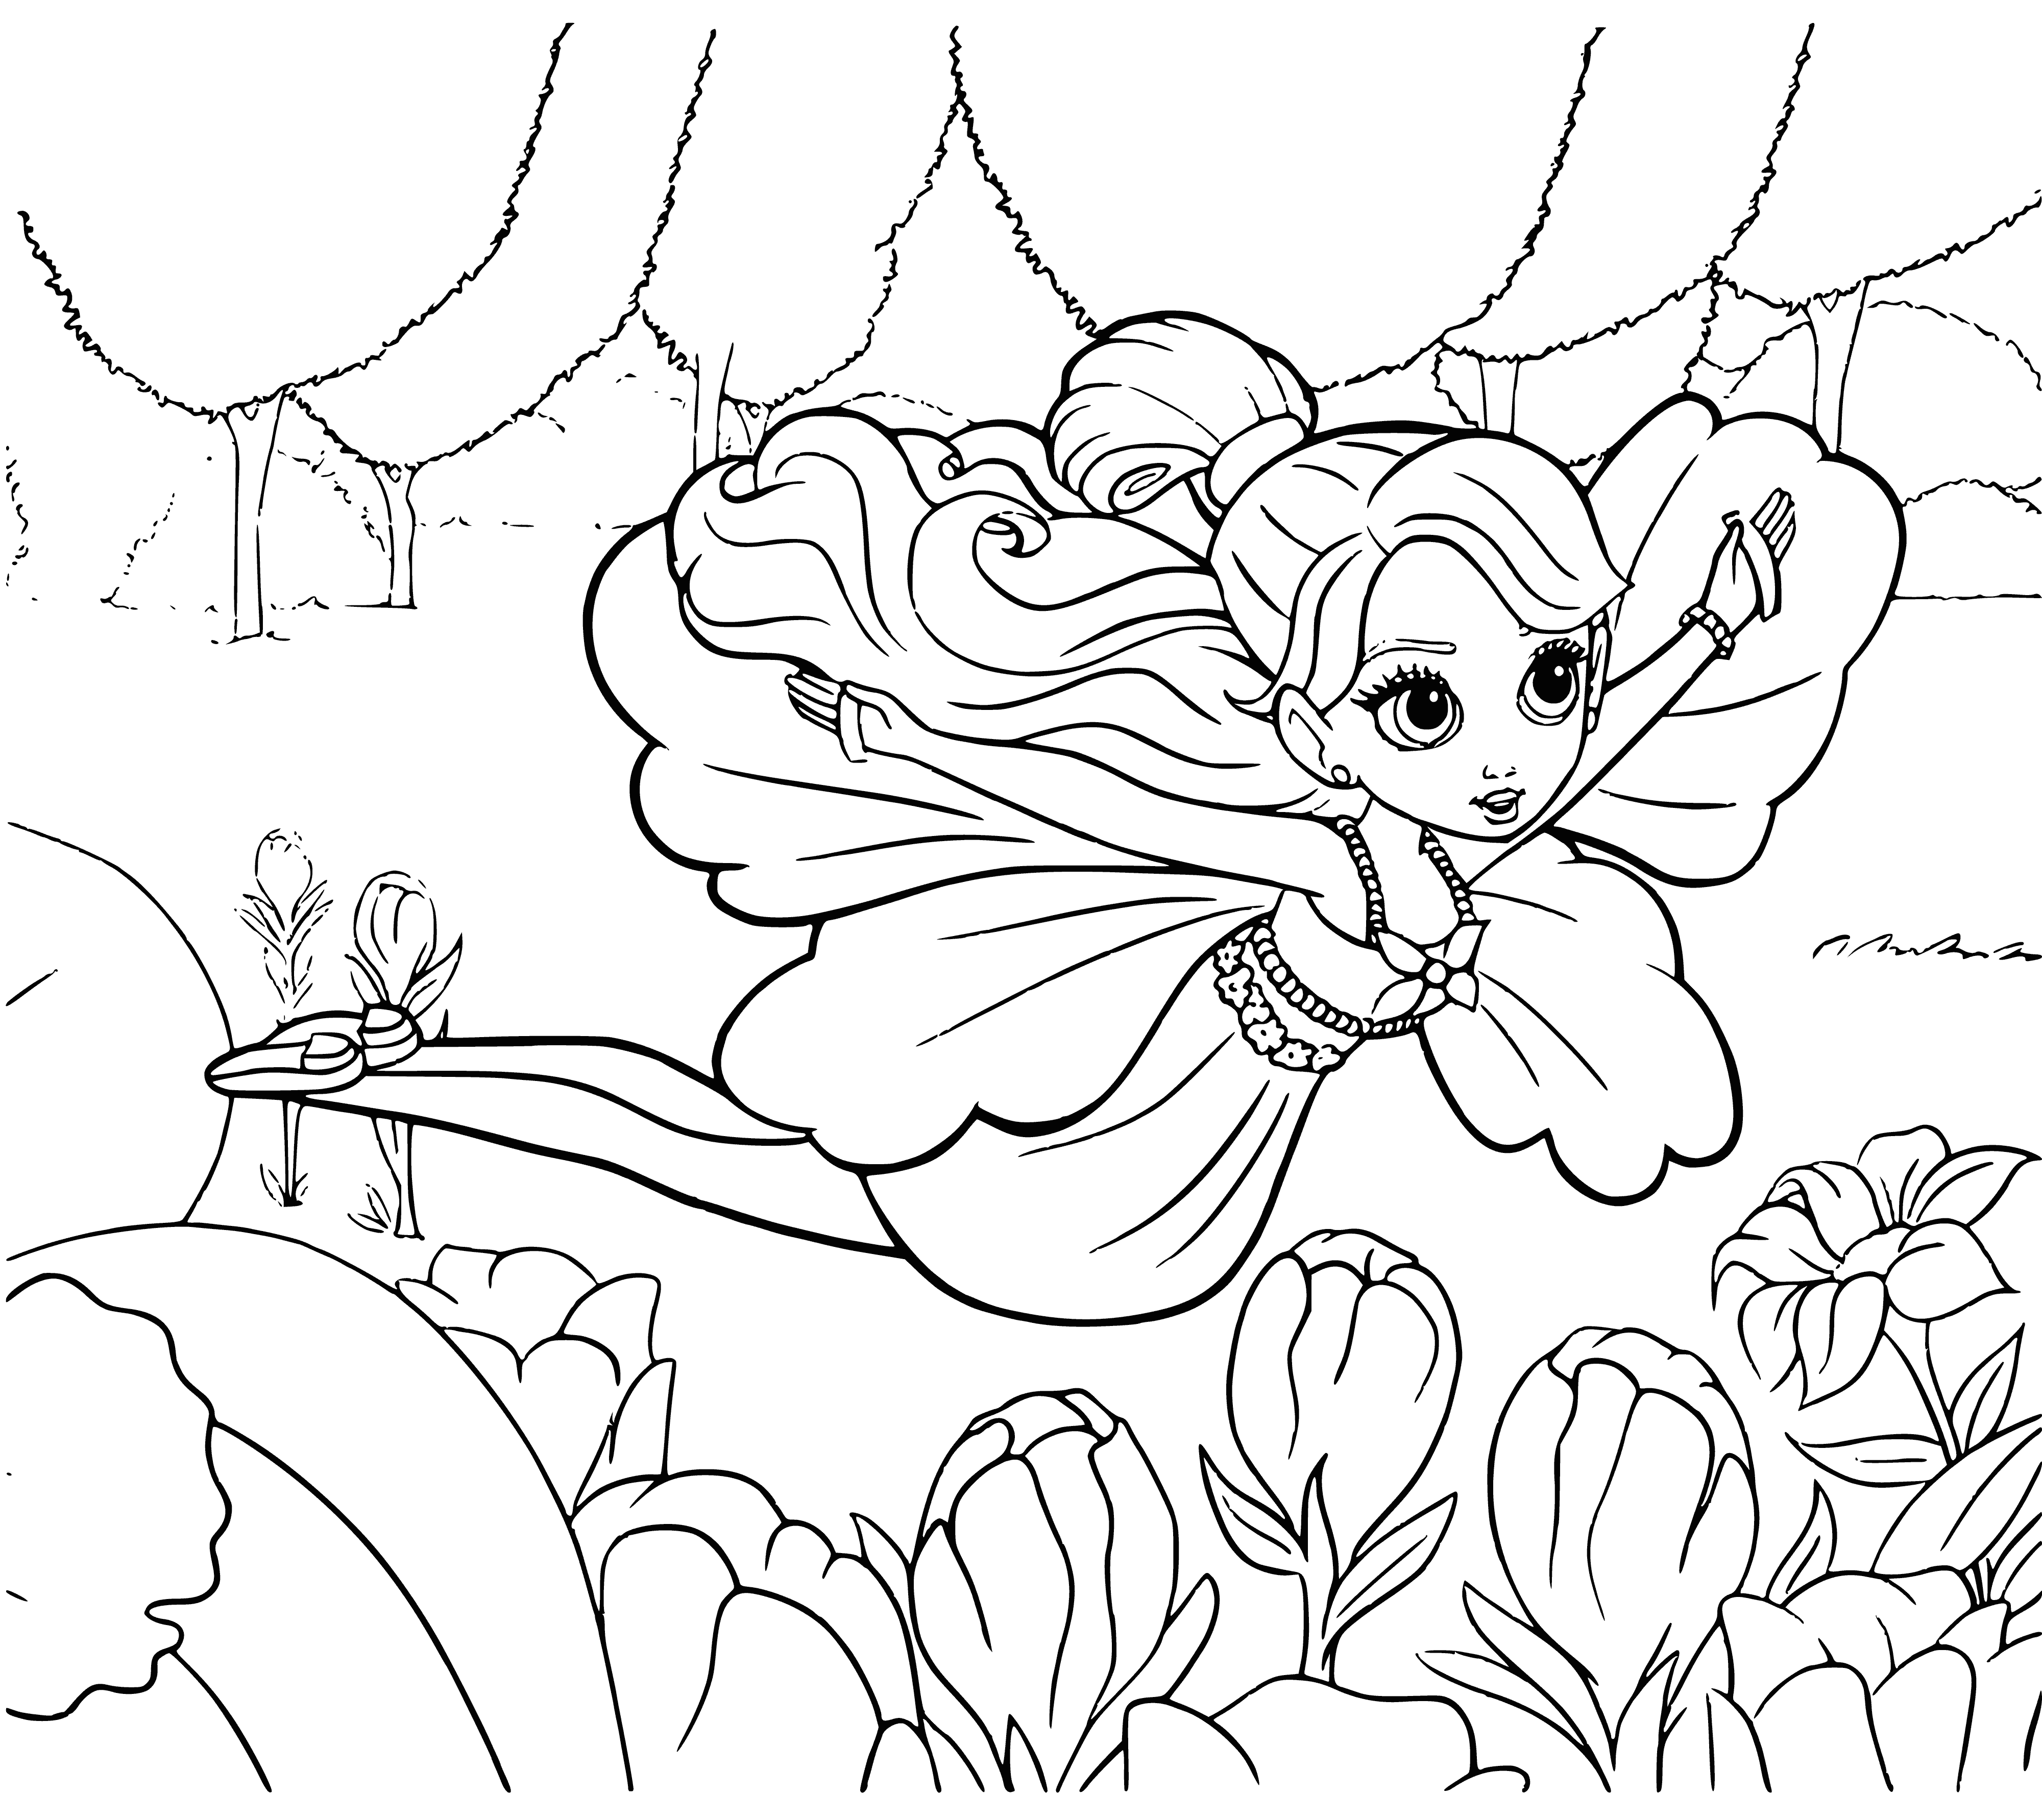 Fairy in flight coloring page